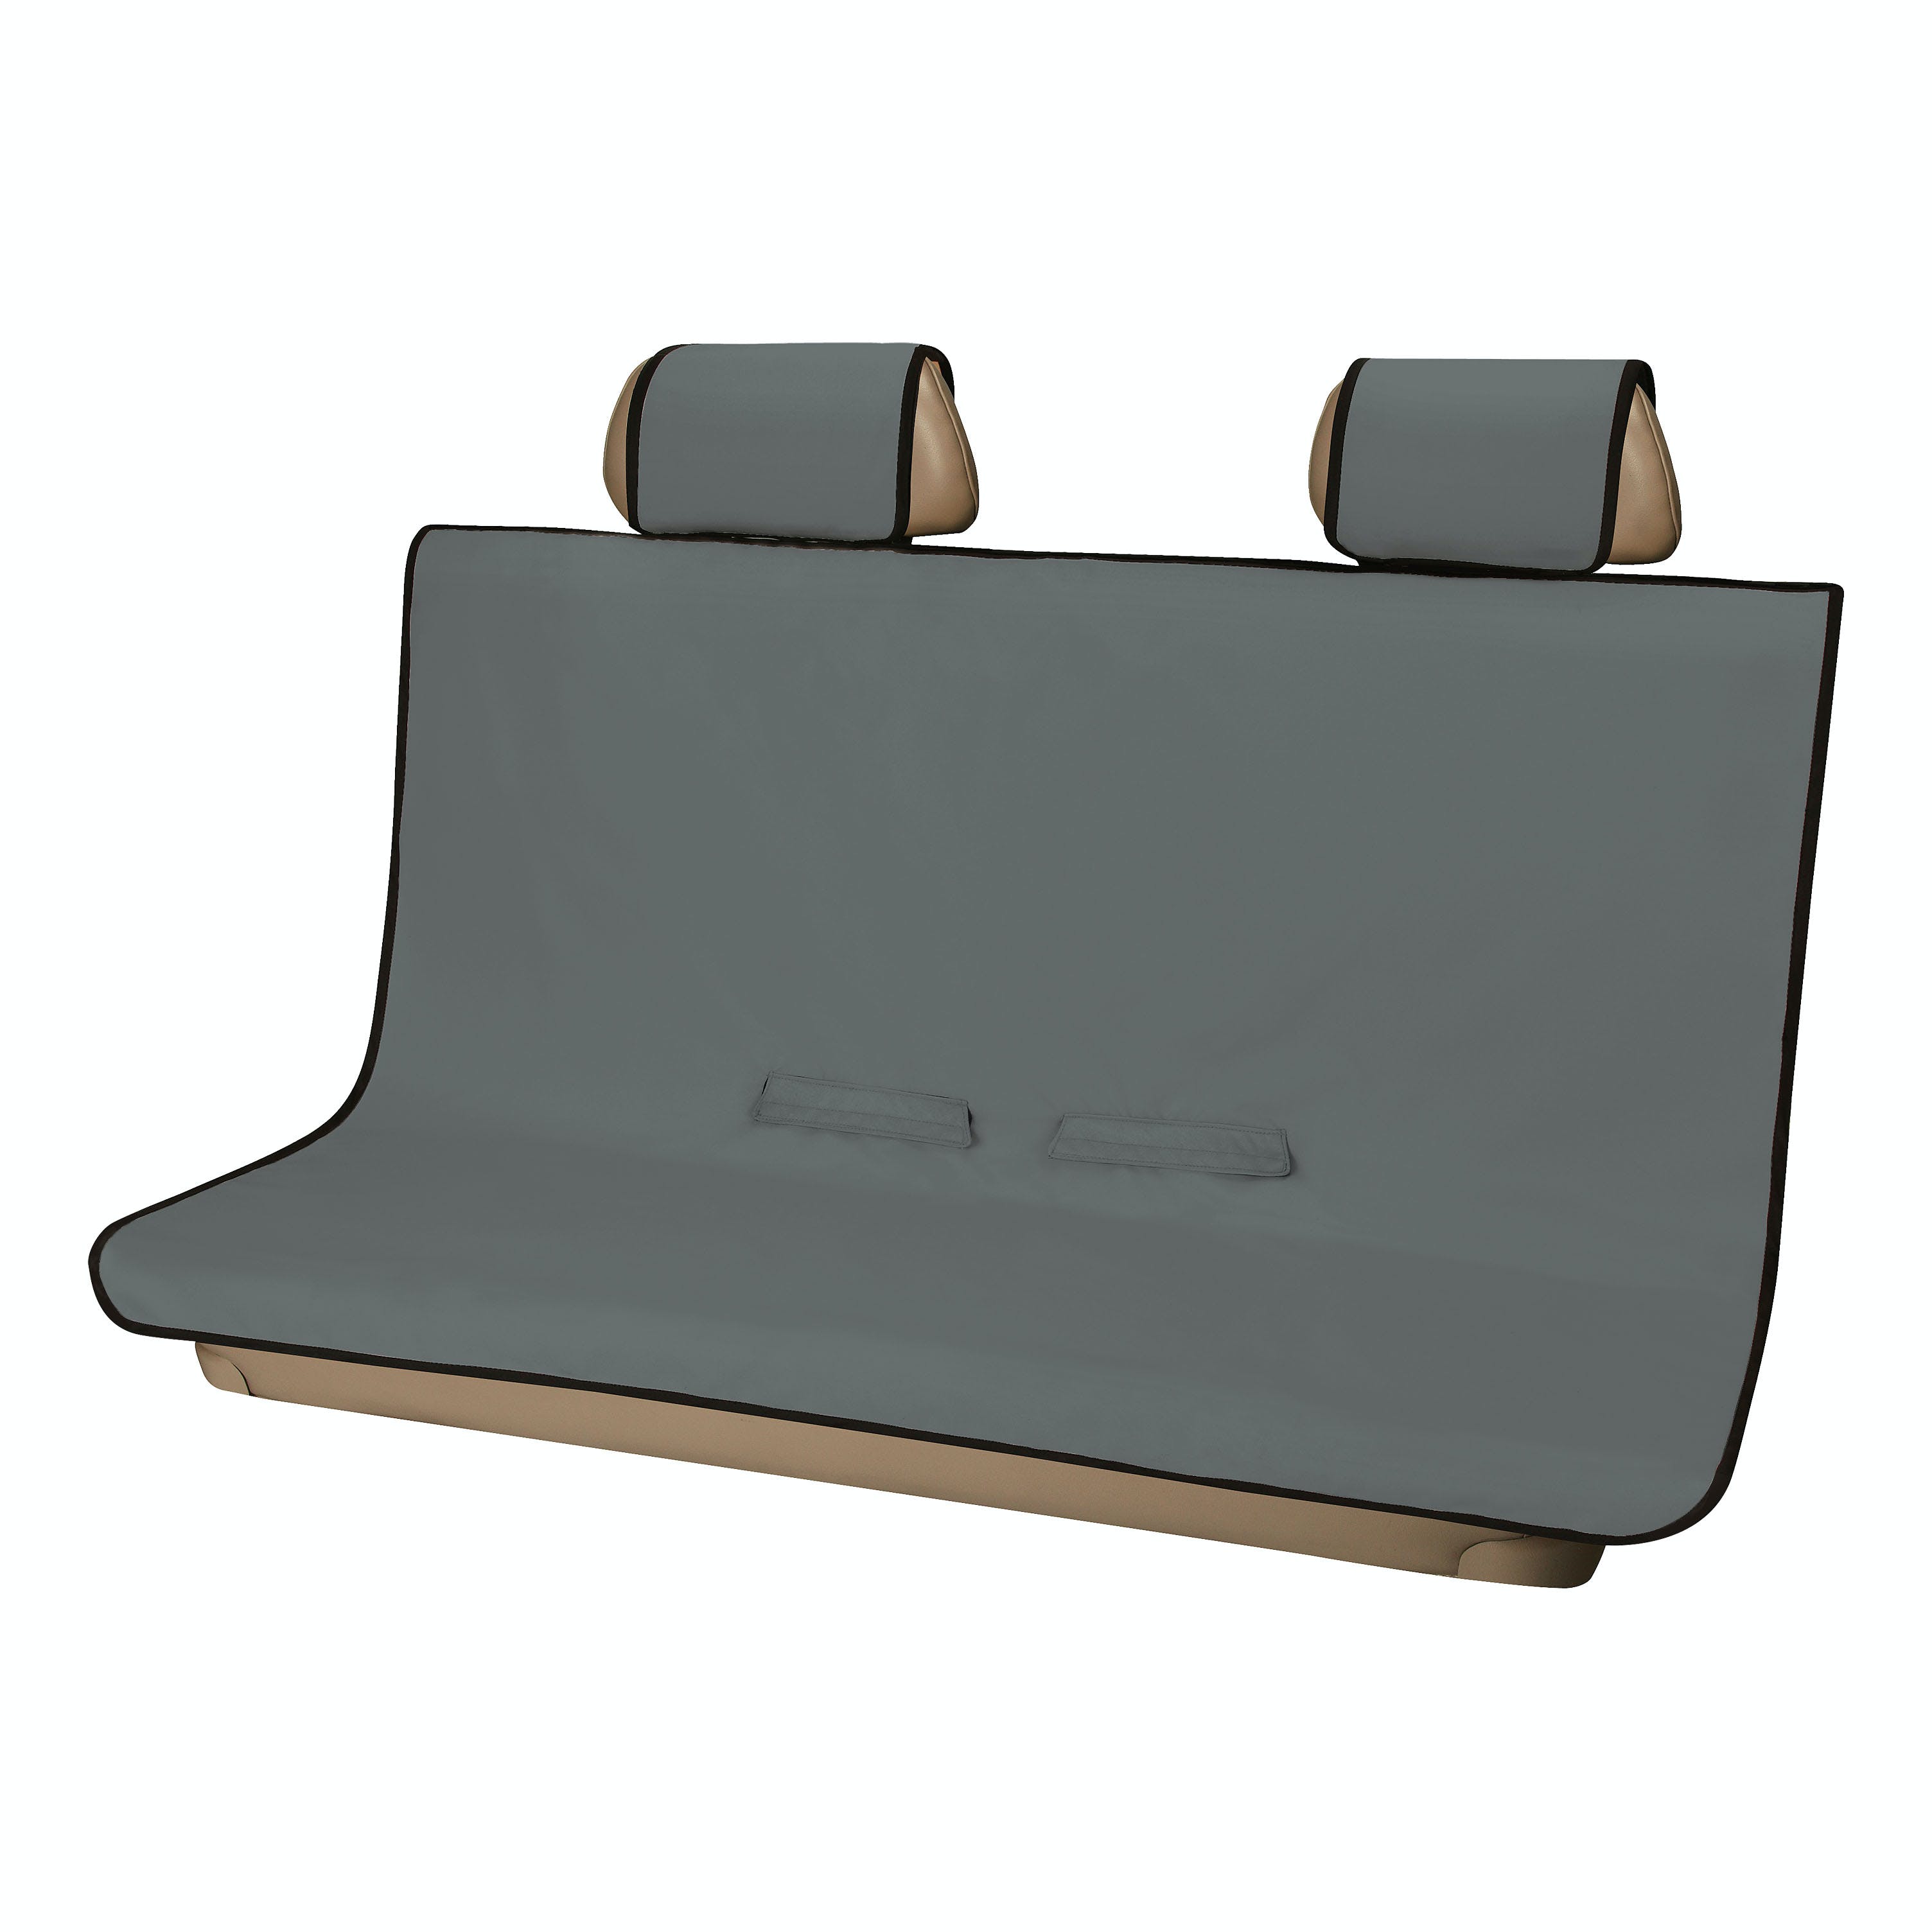 CURT 18510 Seat Defender 58 x 55 Removable Waterproof Grey Bench Seat Cover